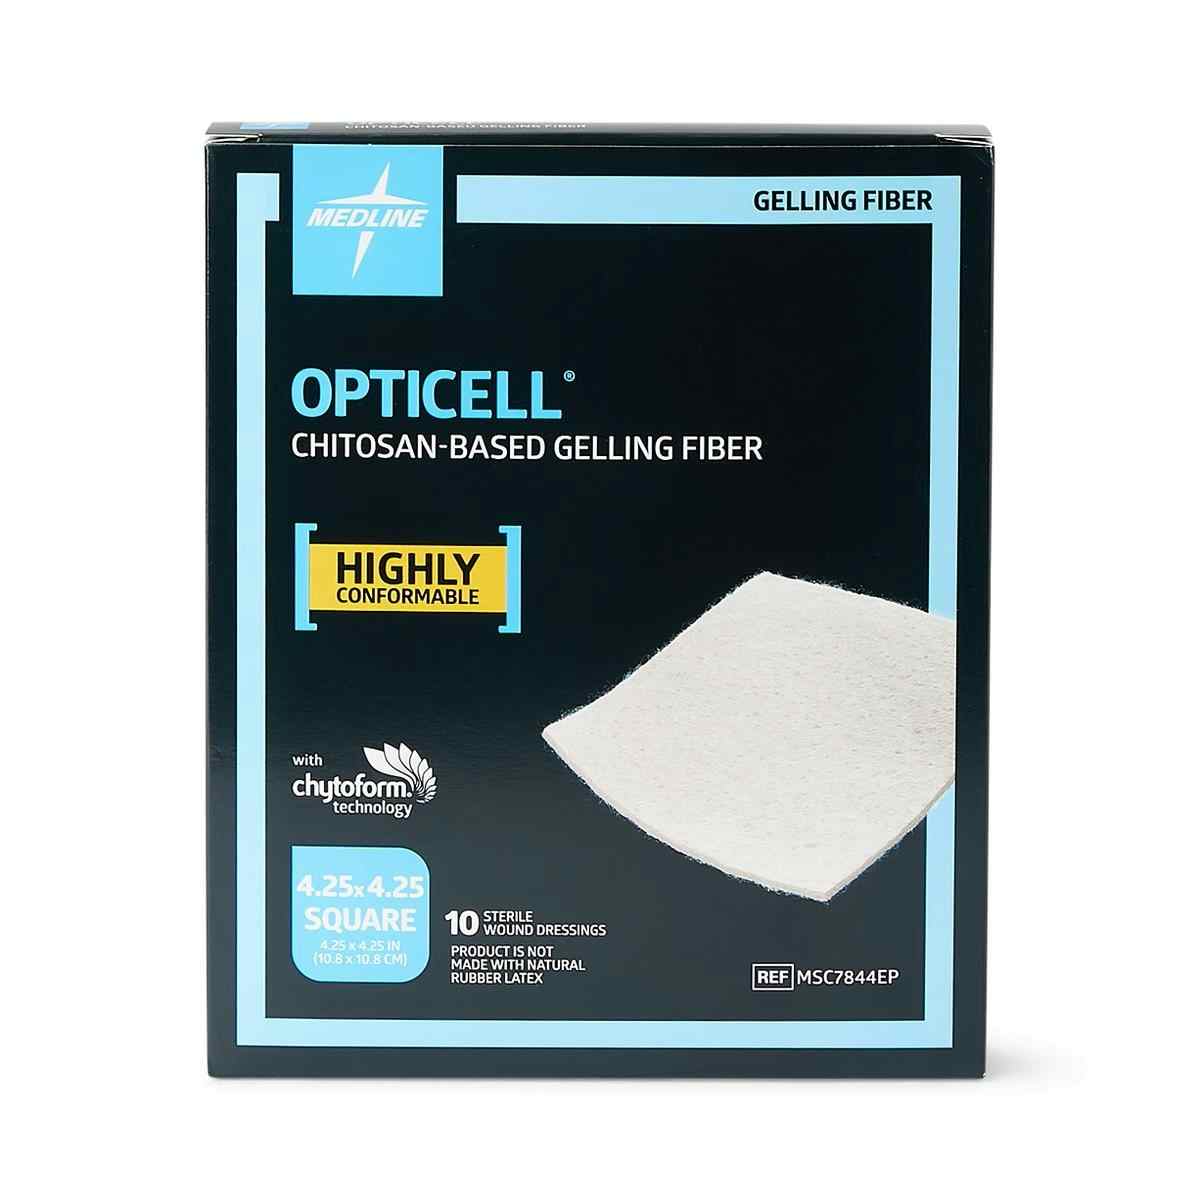 Medline Opticell Chitosan-Based Gelling Fiber Wound Dressing, MSC7844EPZ, 4.25" X 4.25" - Box of 10